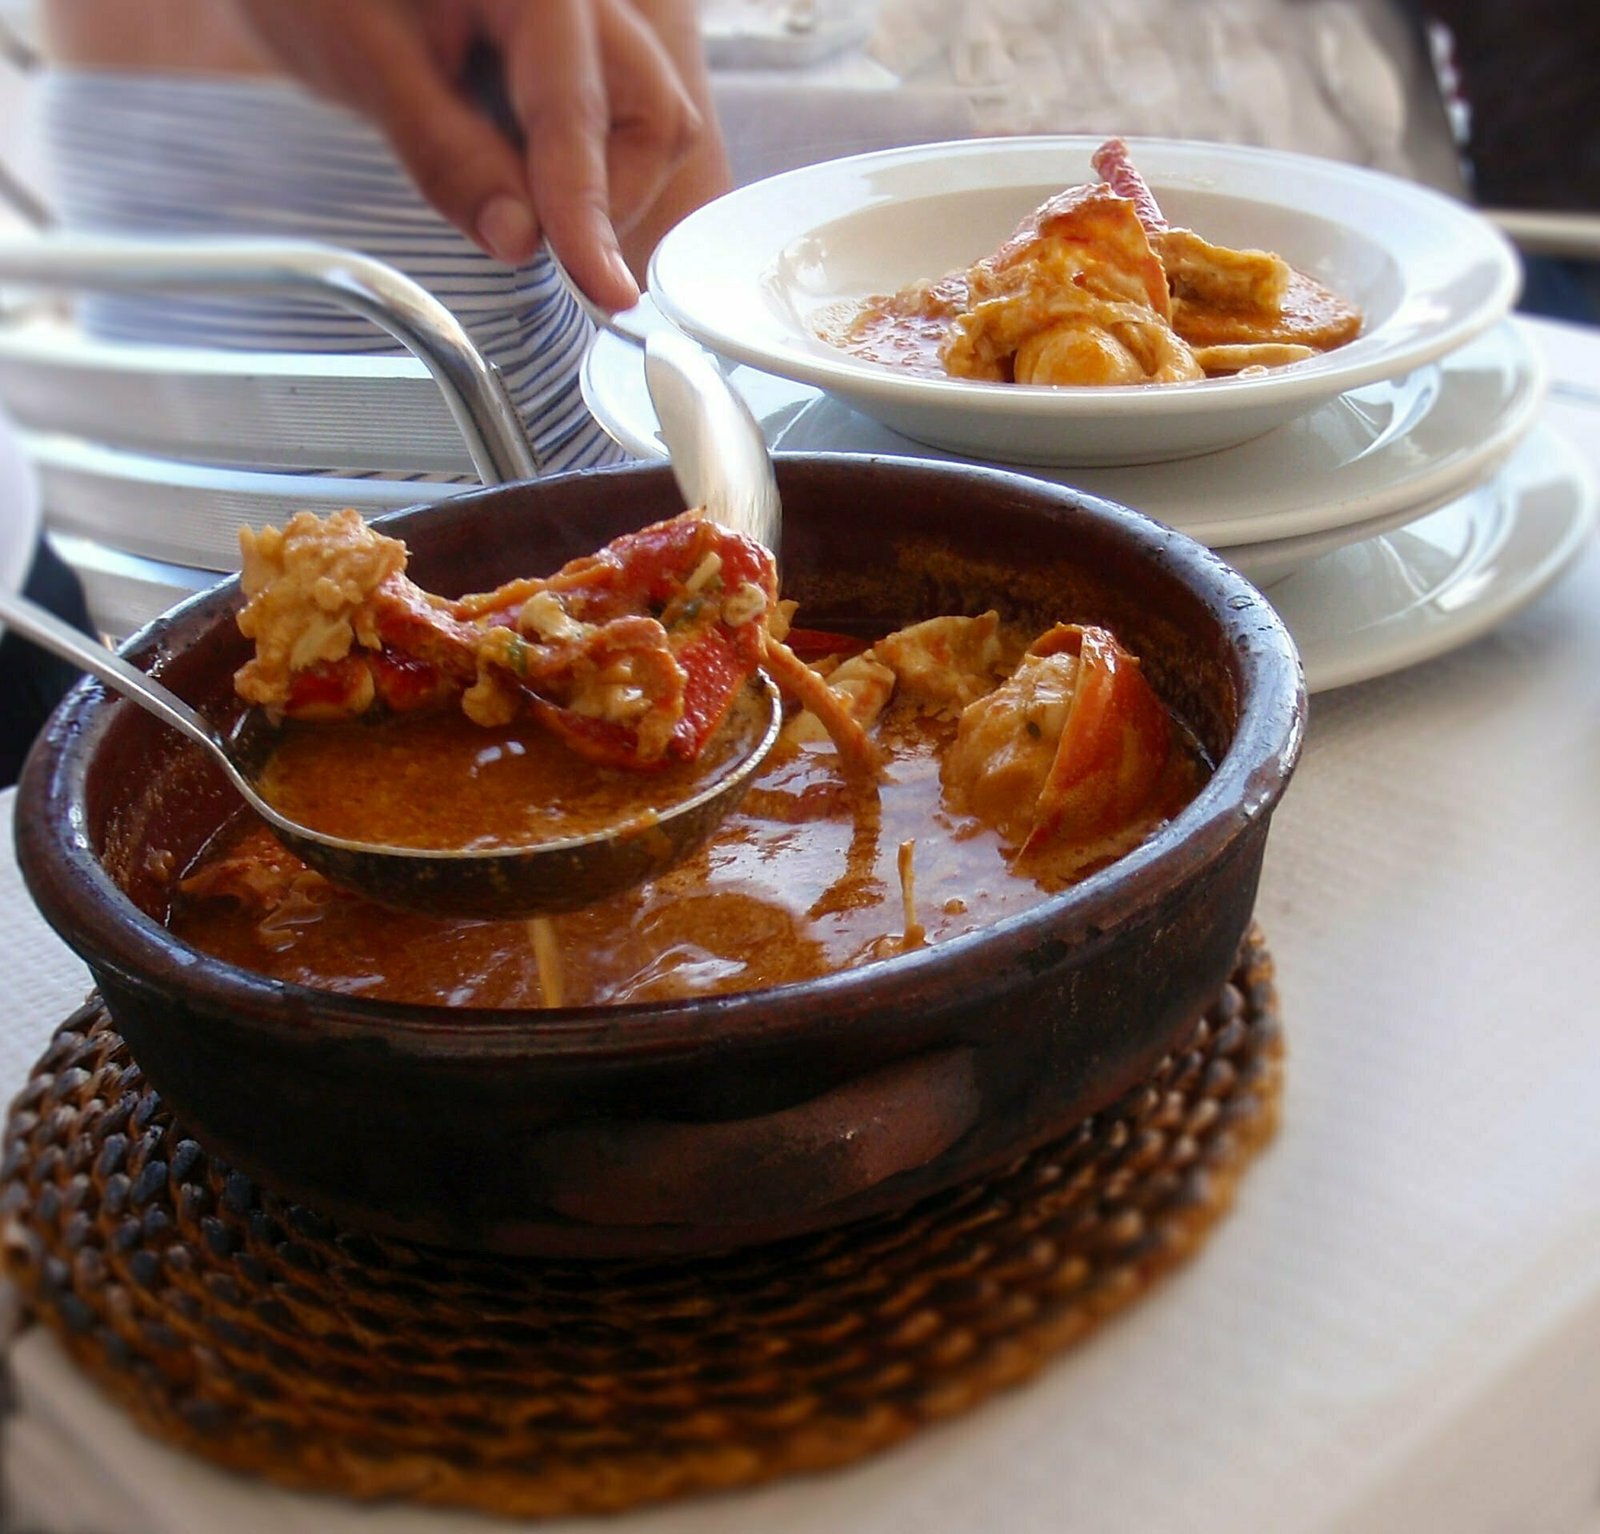 A table hold s a large bowl of Caldereta de langosta, a traditional Mallorcan dish thqt being served to guests in the background 